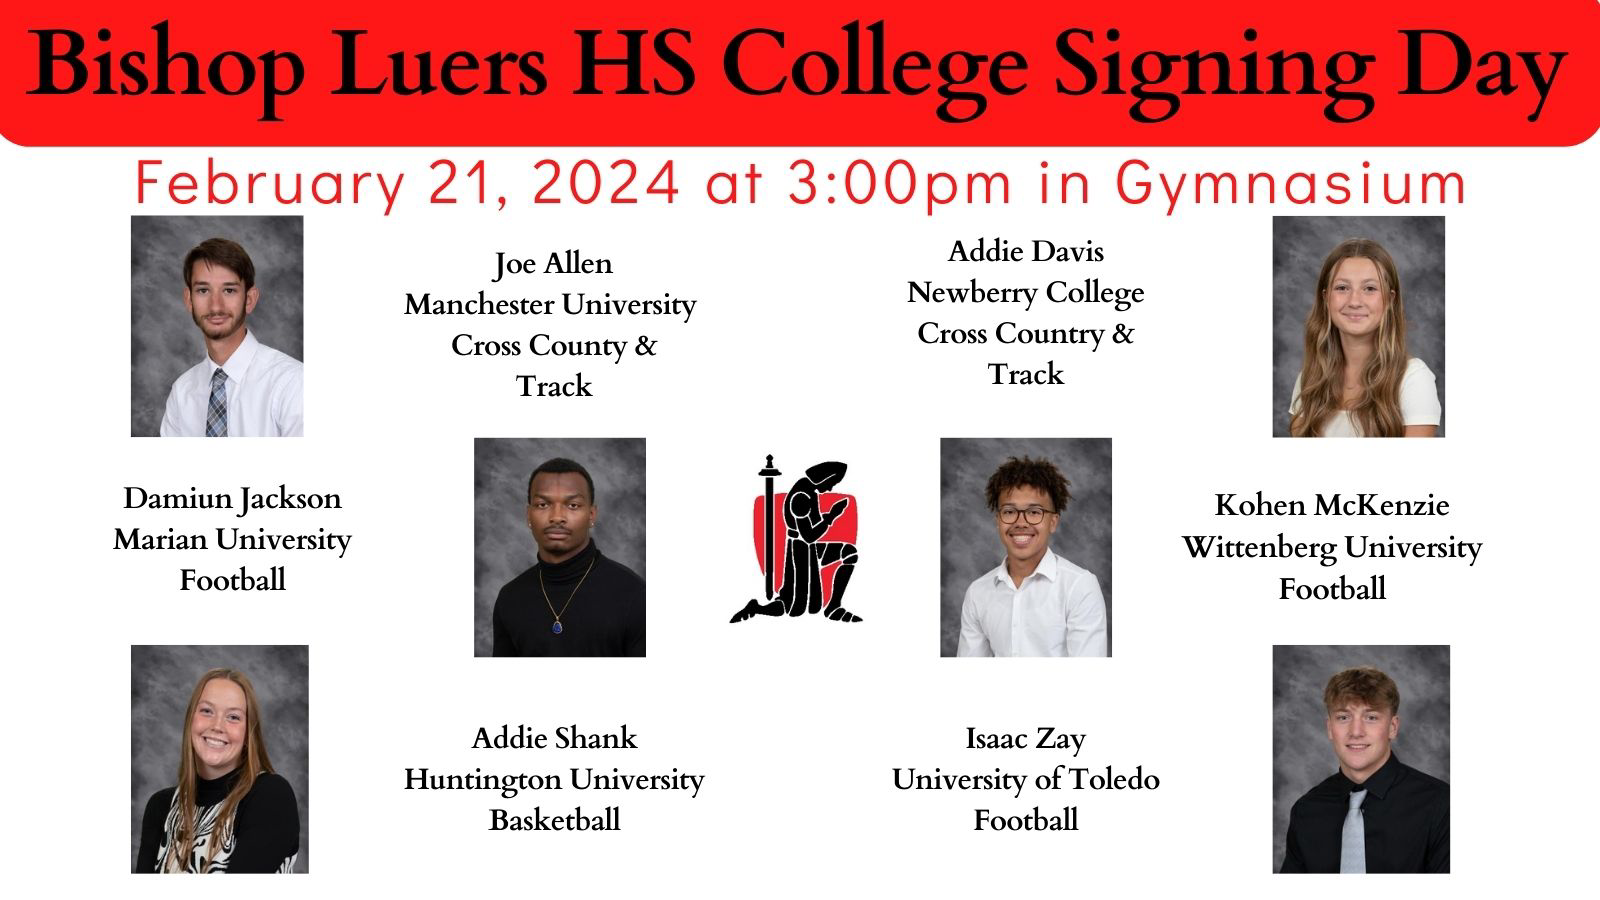 Copy of Bishop Luers HS College Signing Day.png